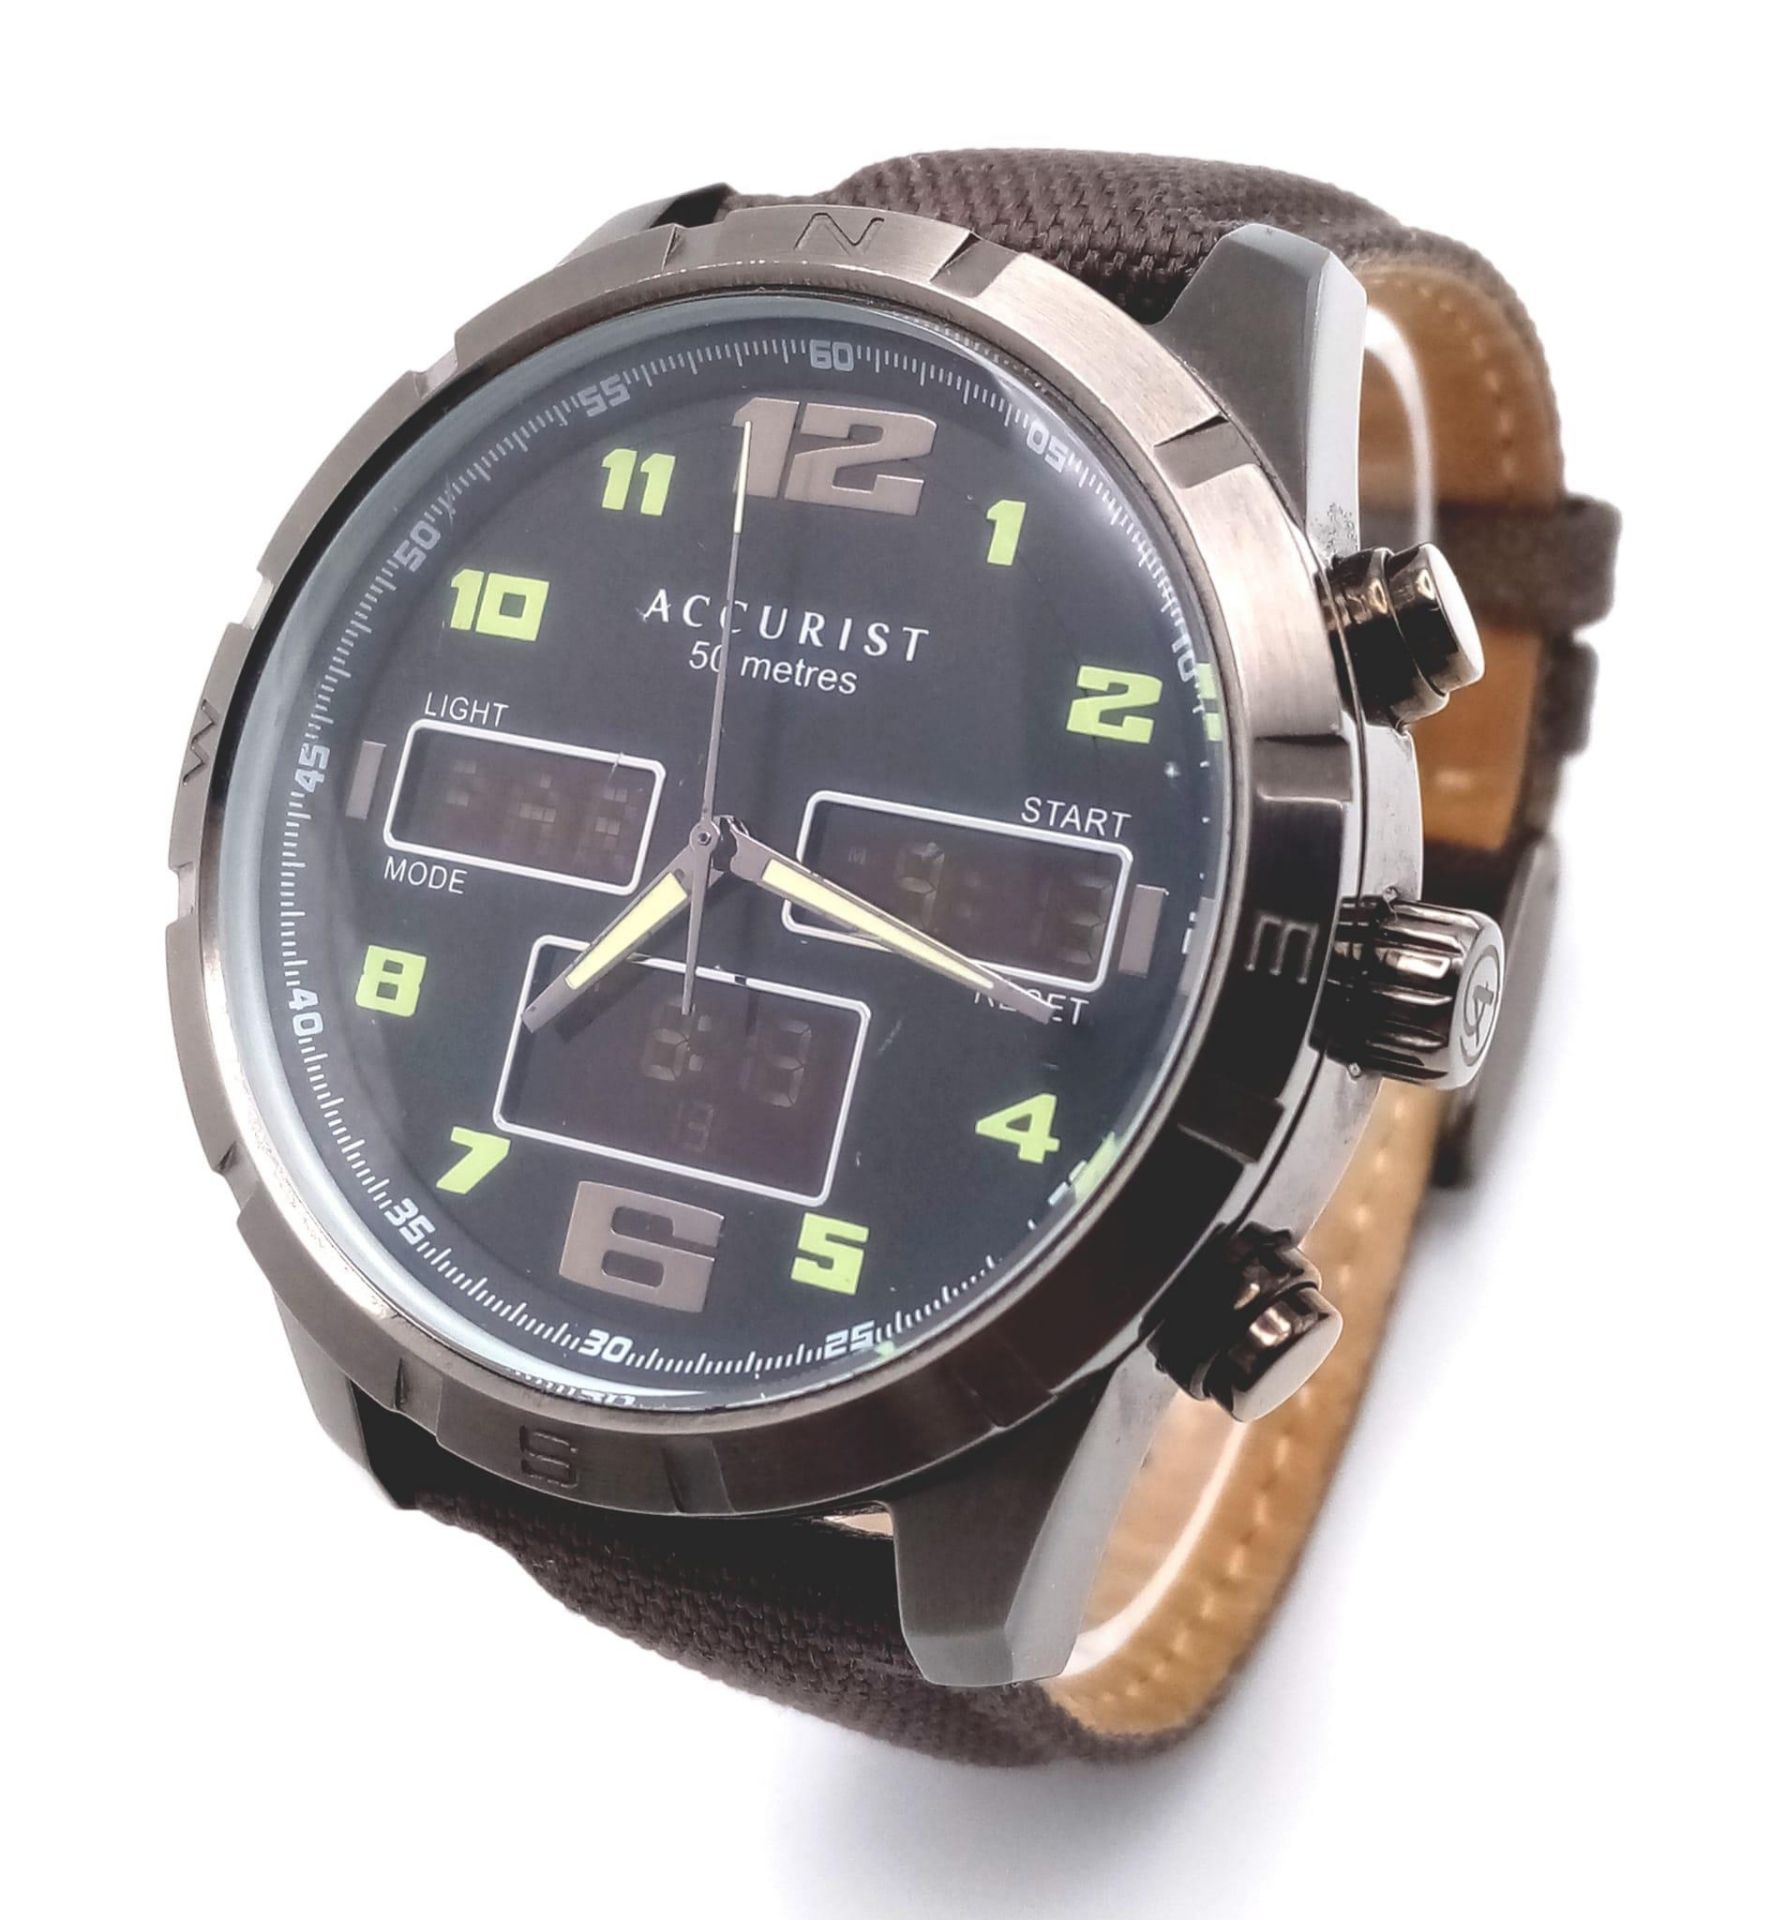 An Excellent Condition Accurist Model 7232 Men’s Digital and Analogue Watch. Bronze Tone. 48mm